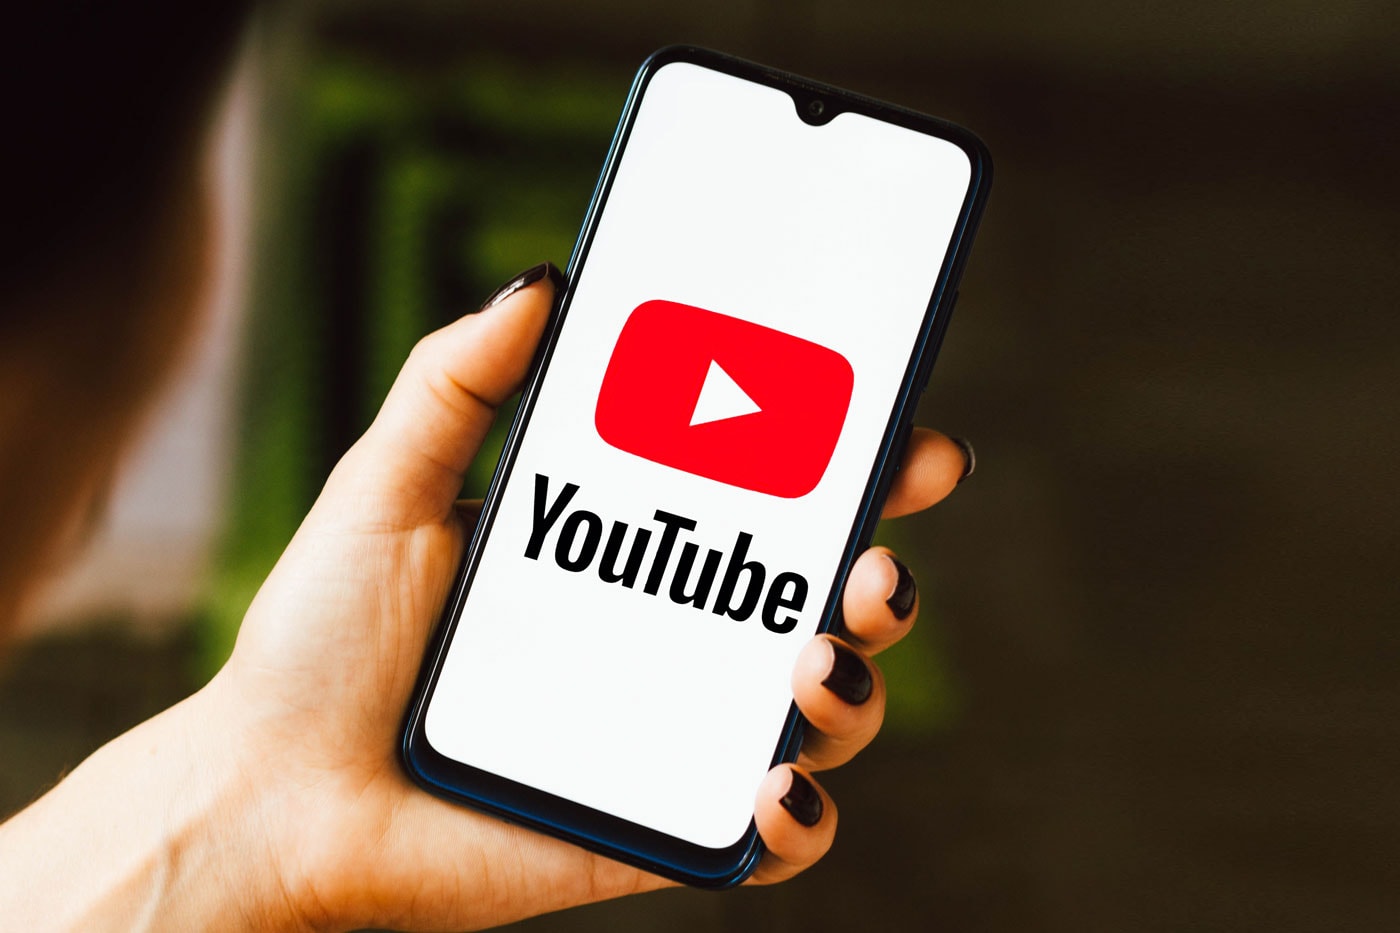 YouTube Offers a Paid Subscription Service